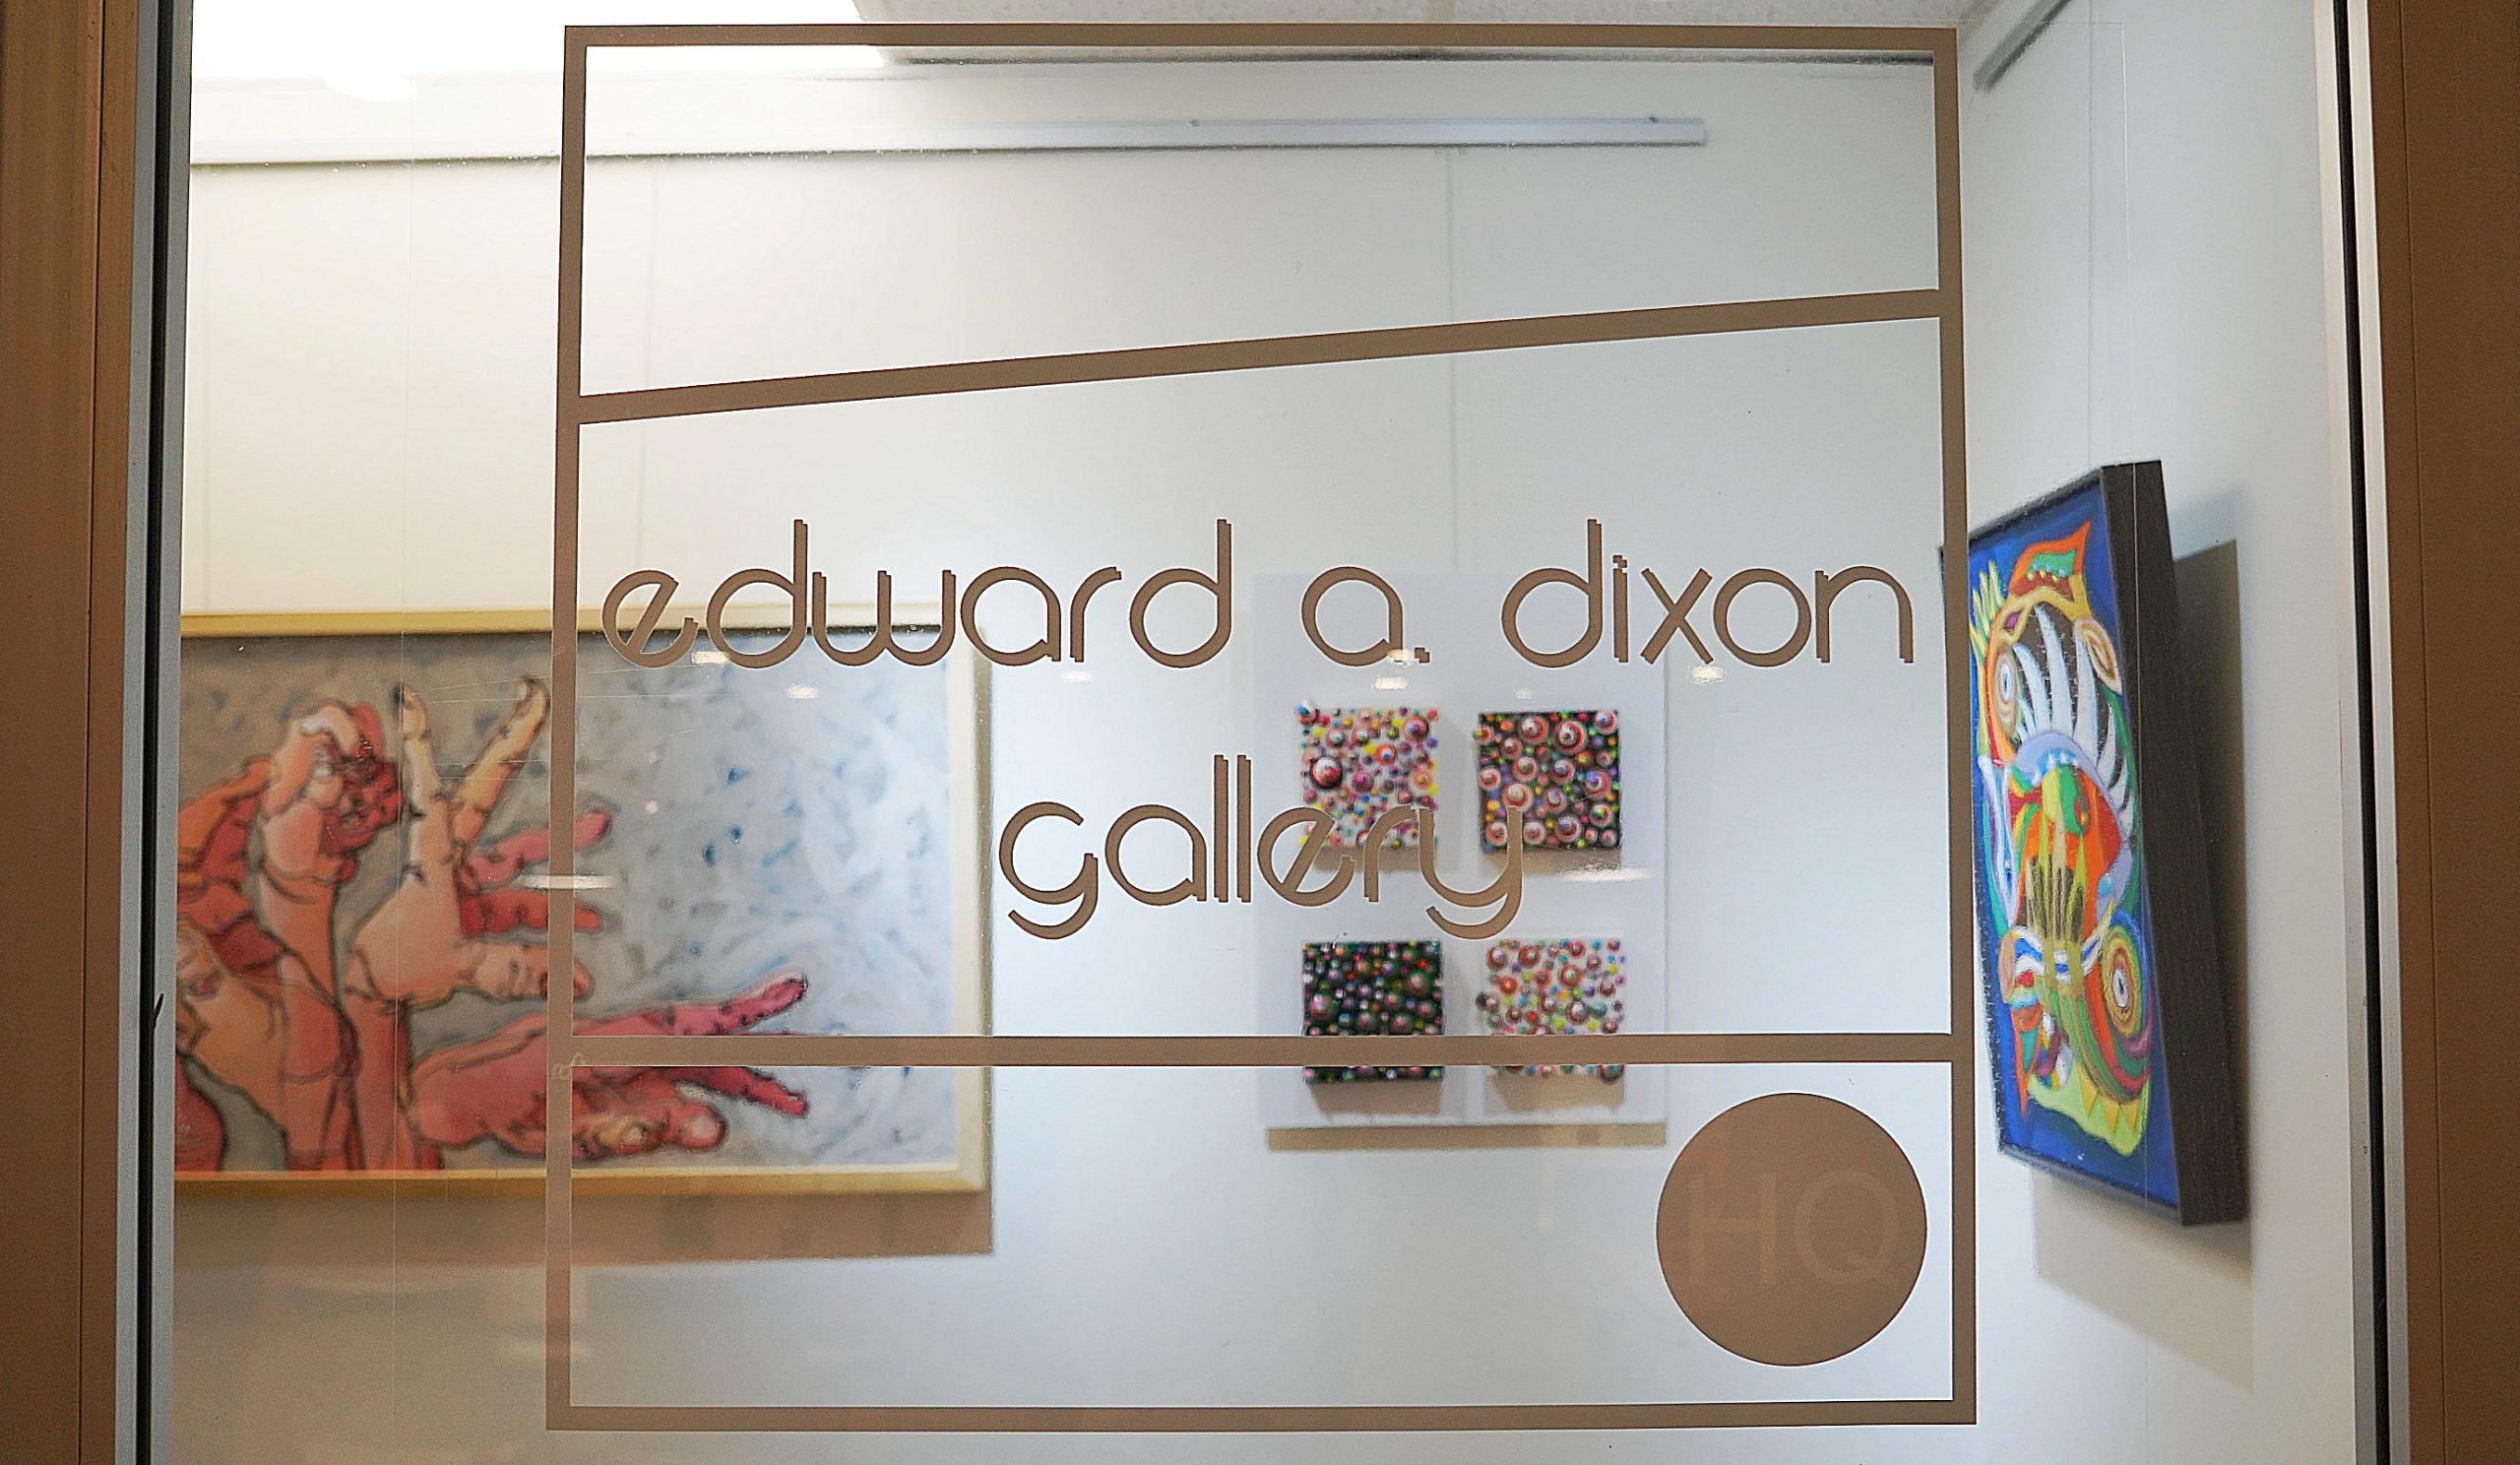 Image of the window of the Edward A Dixong Gallery. Their logo displays showing the gallery name